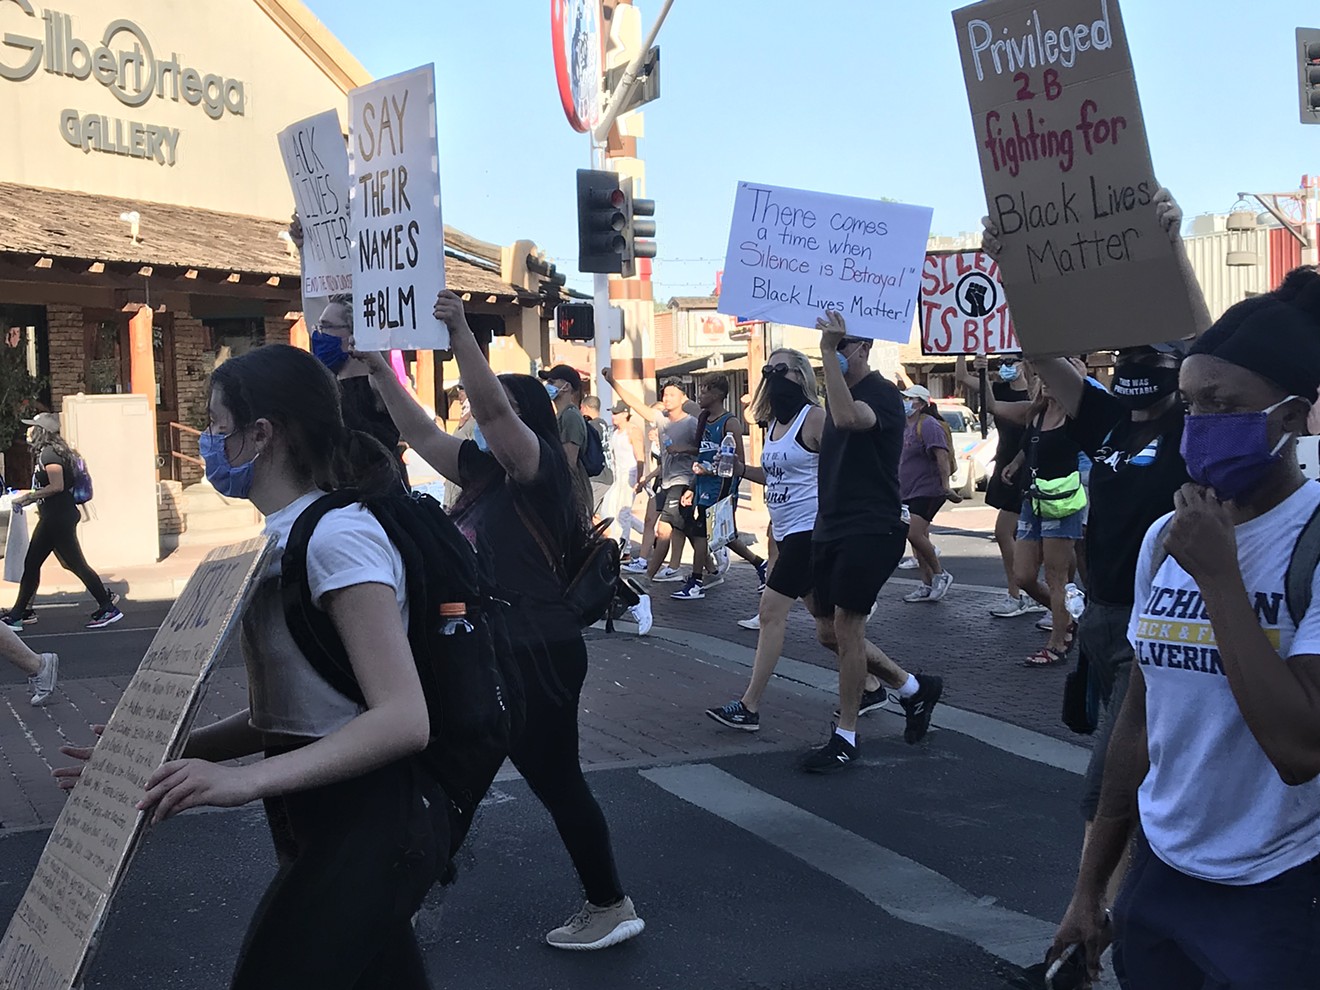 Protesters marching peacefully along Scottsdale Road in Old Town.